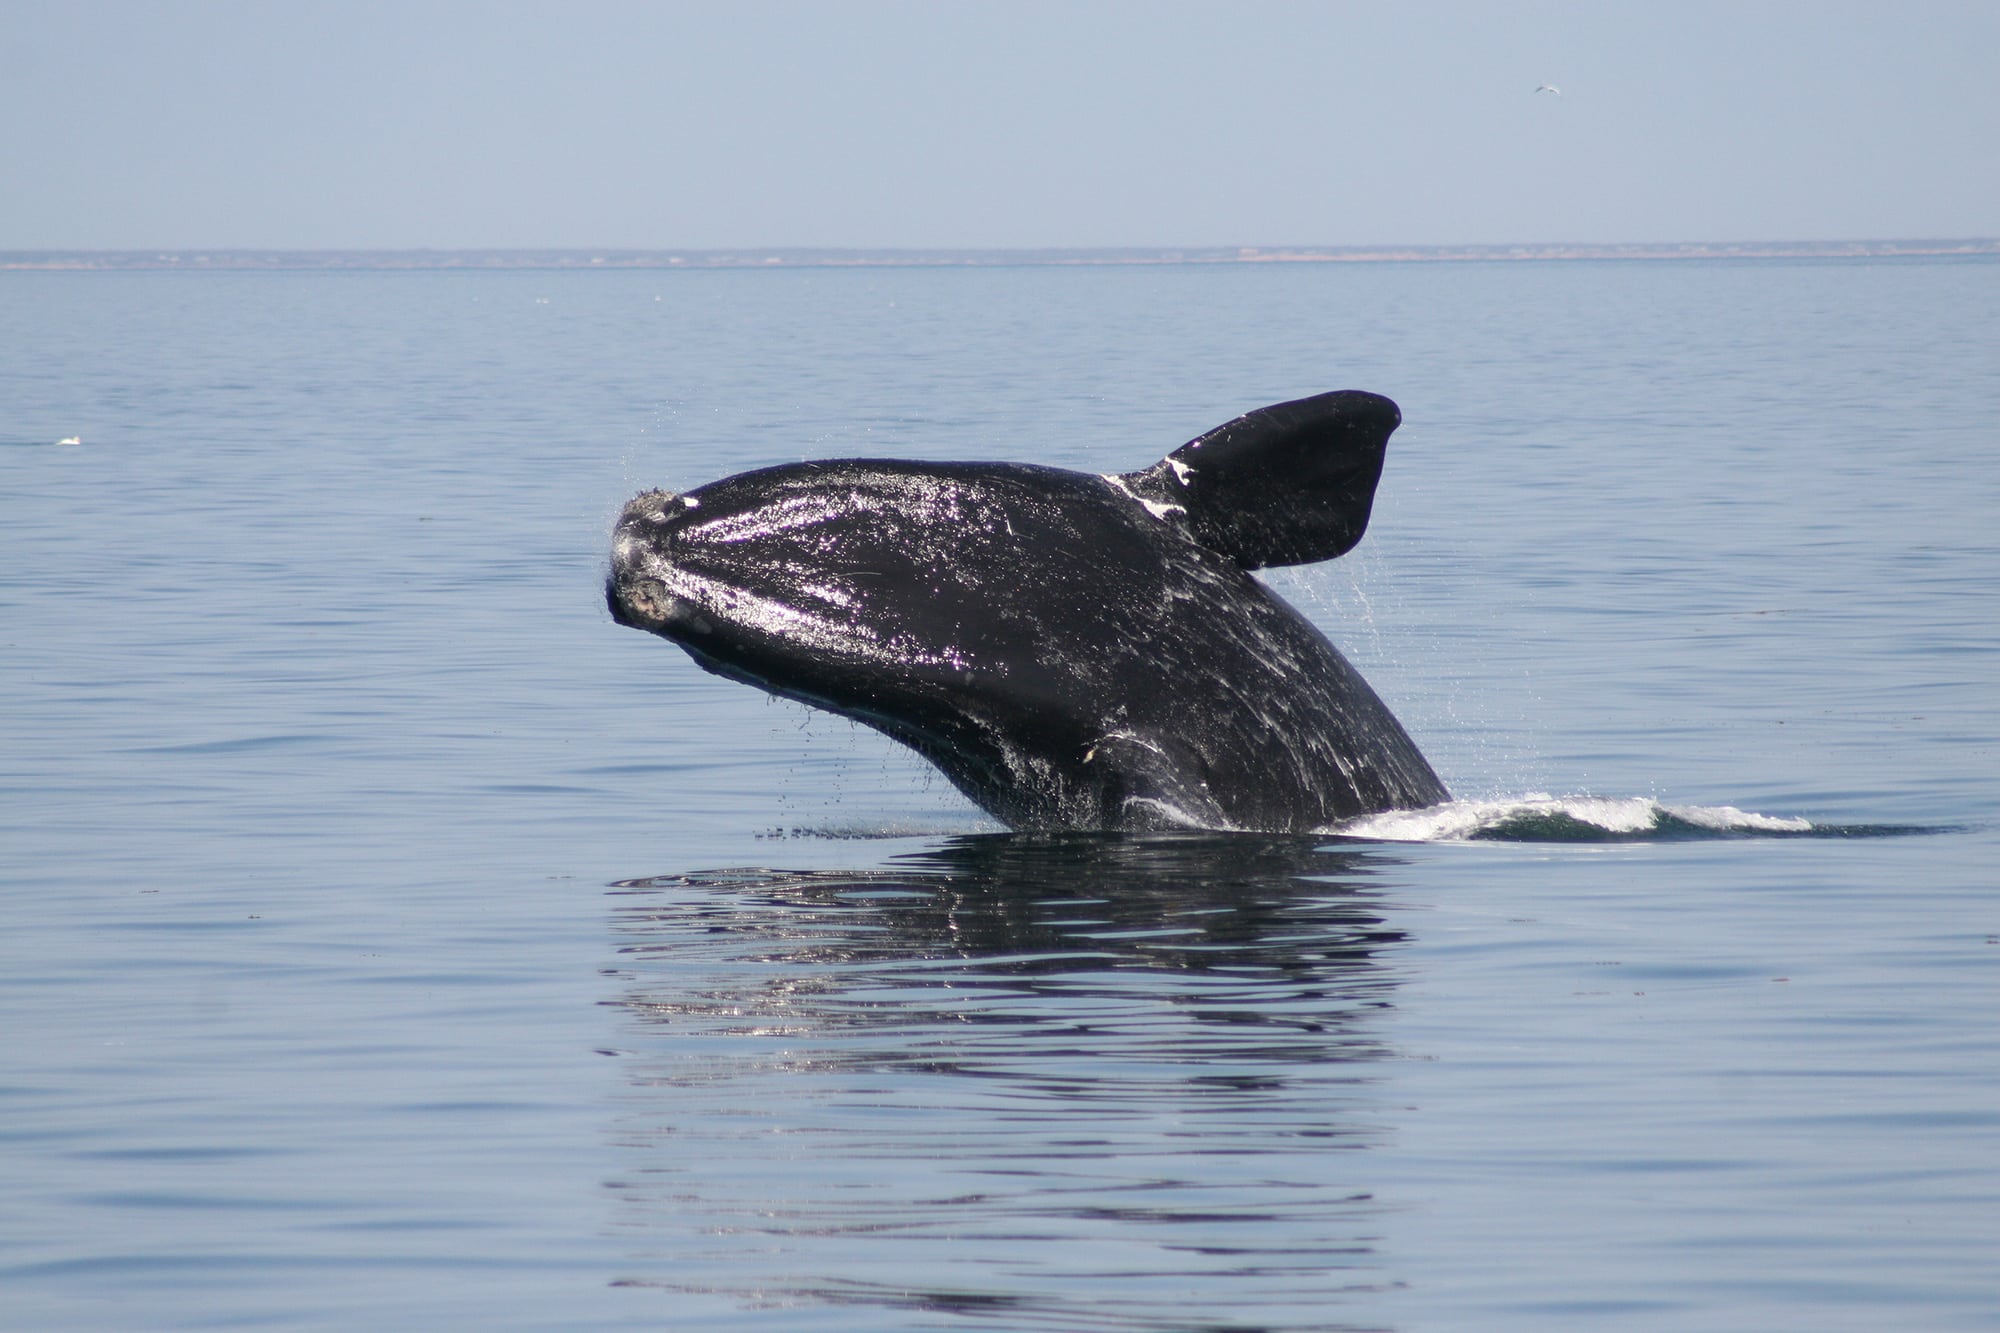 North Atlantic right whale - Whale & Dolphin Conservation USA